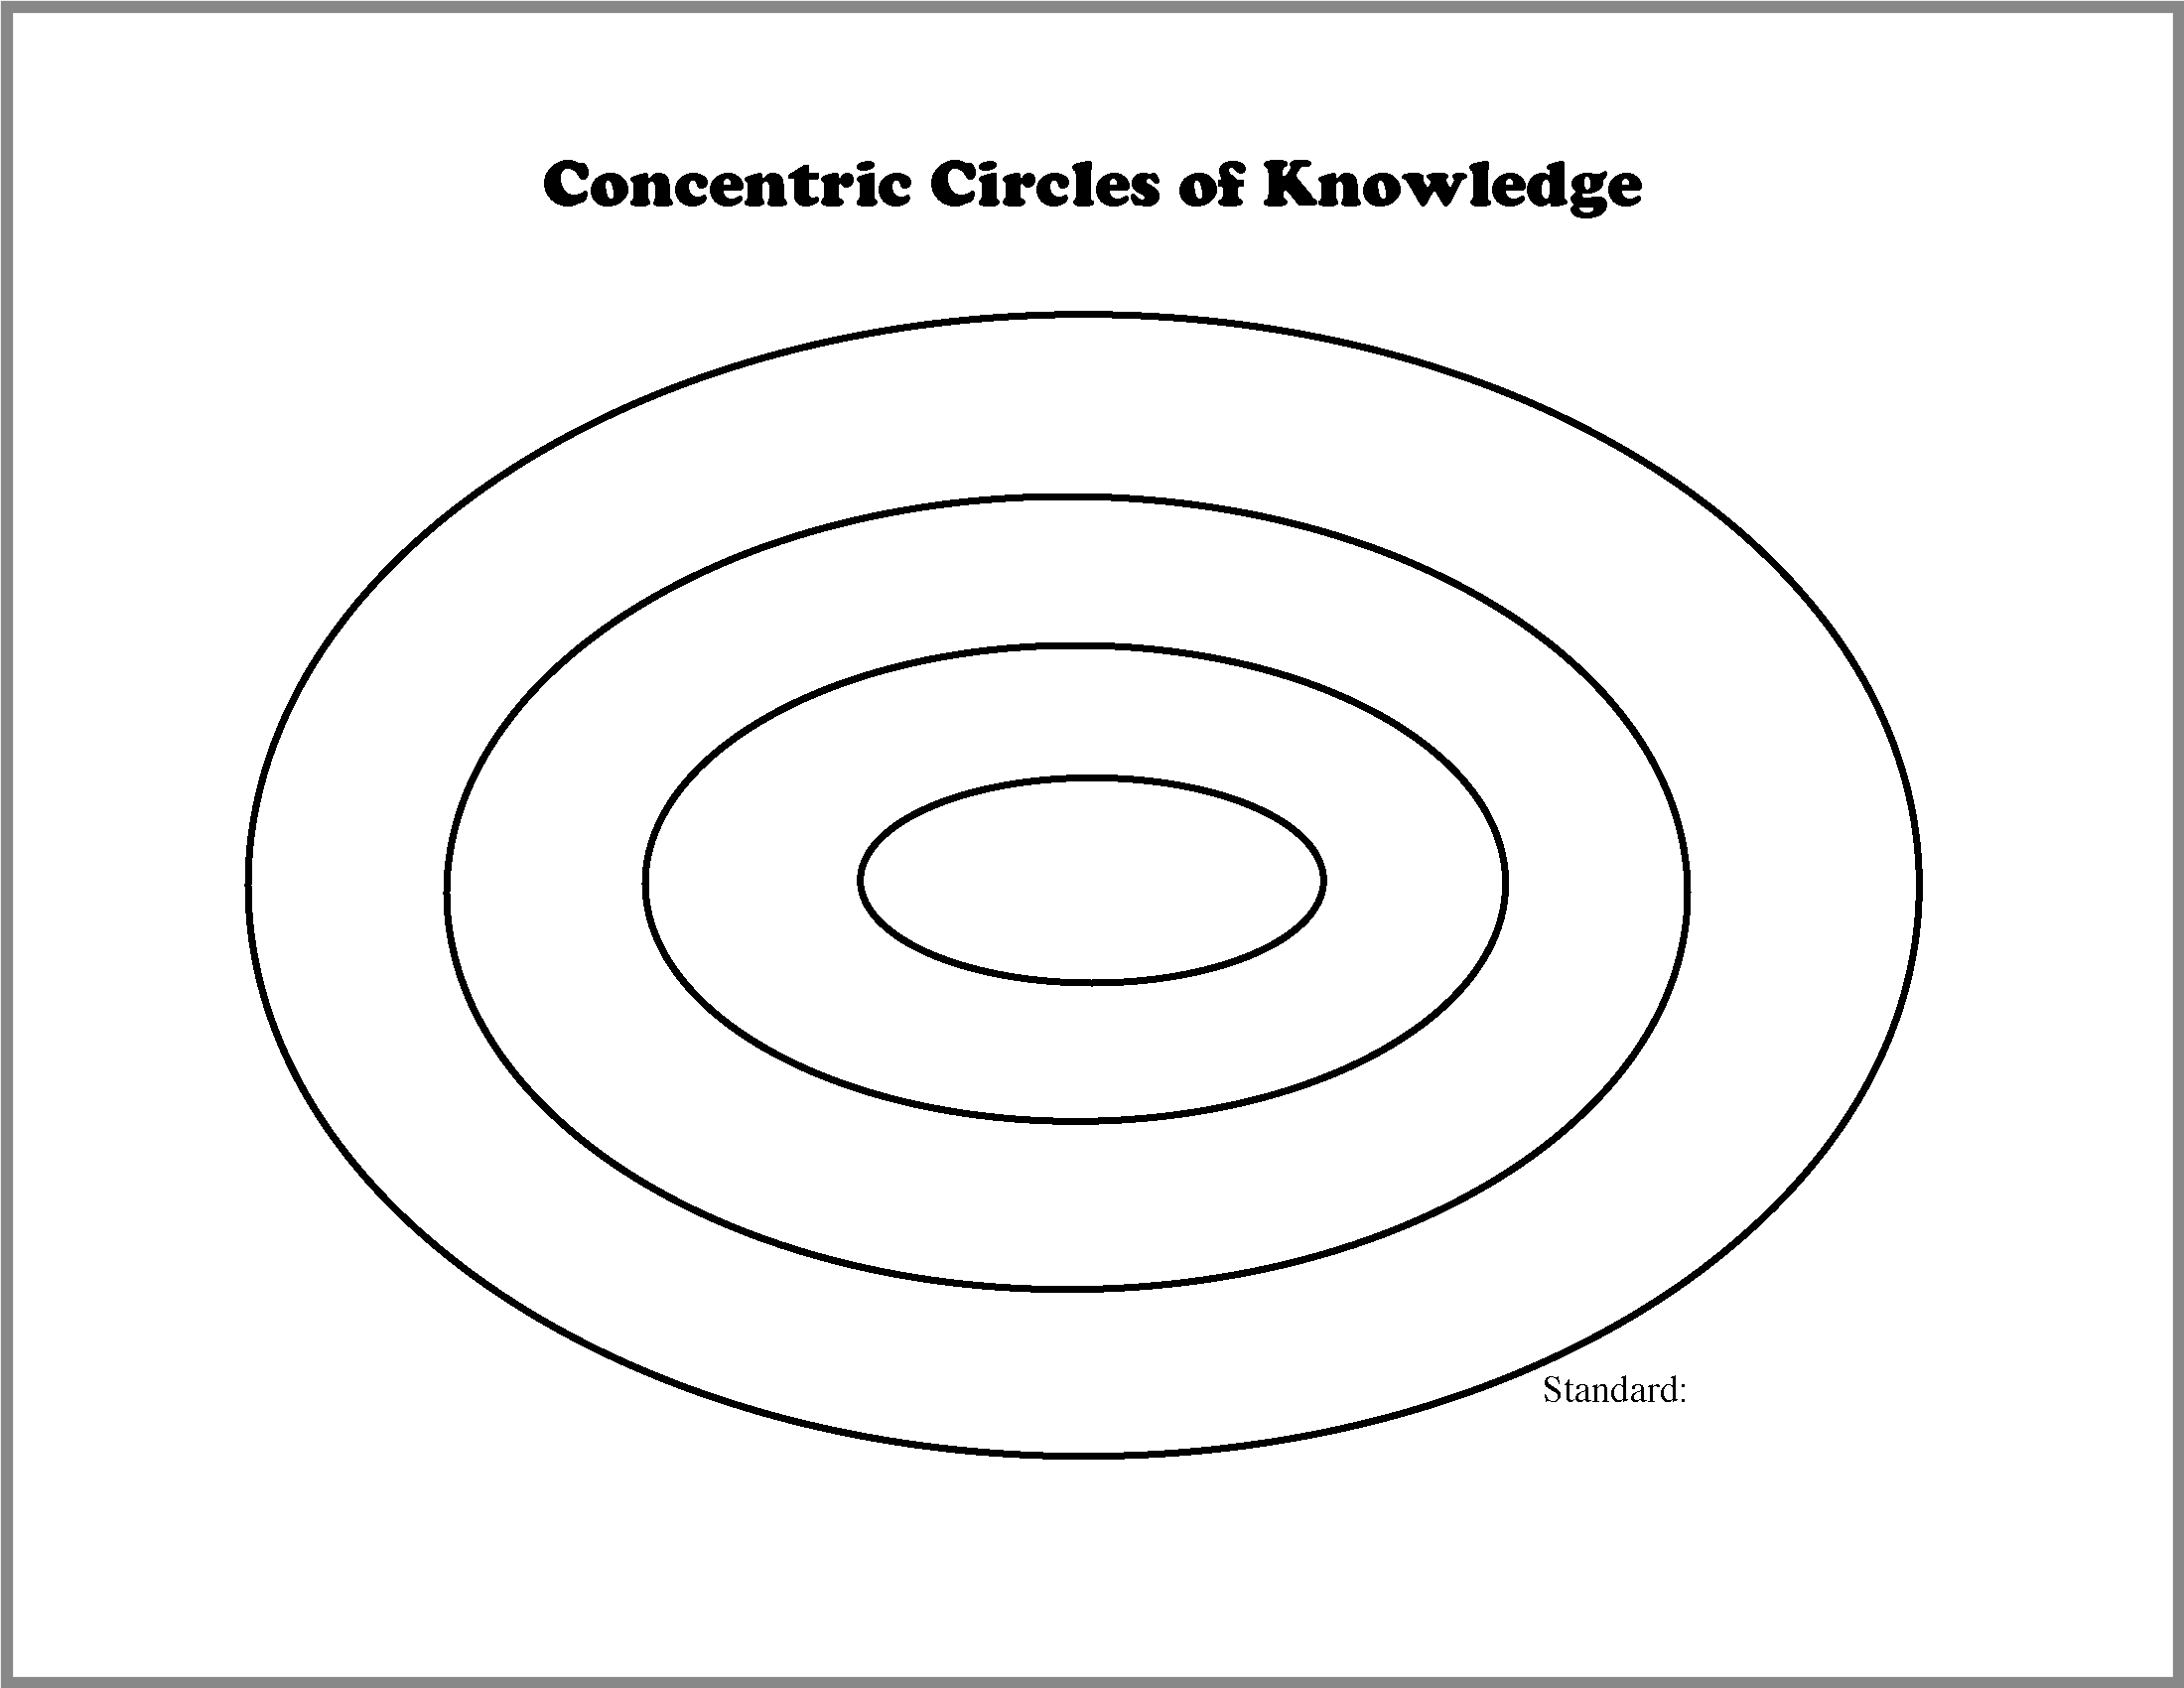 Envision Gifted. Concentric Circles of Knowledge Template